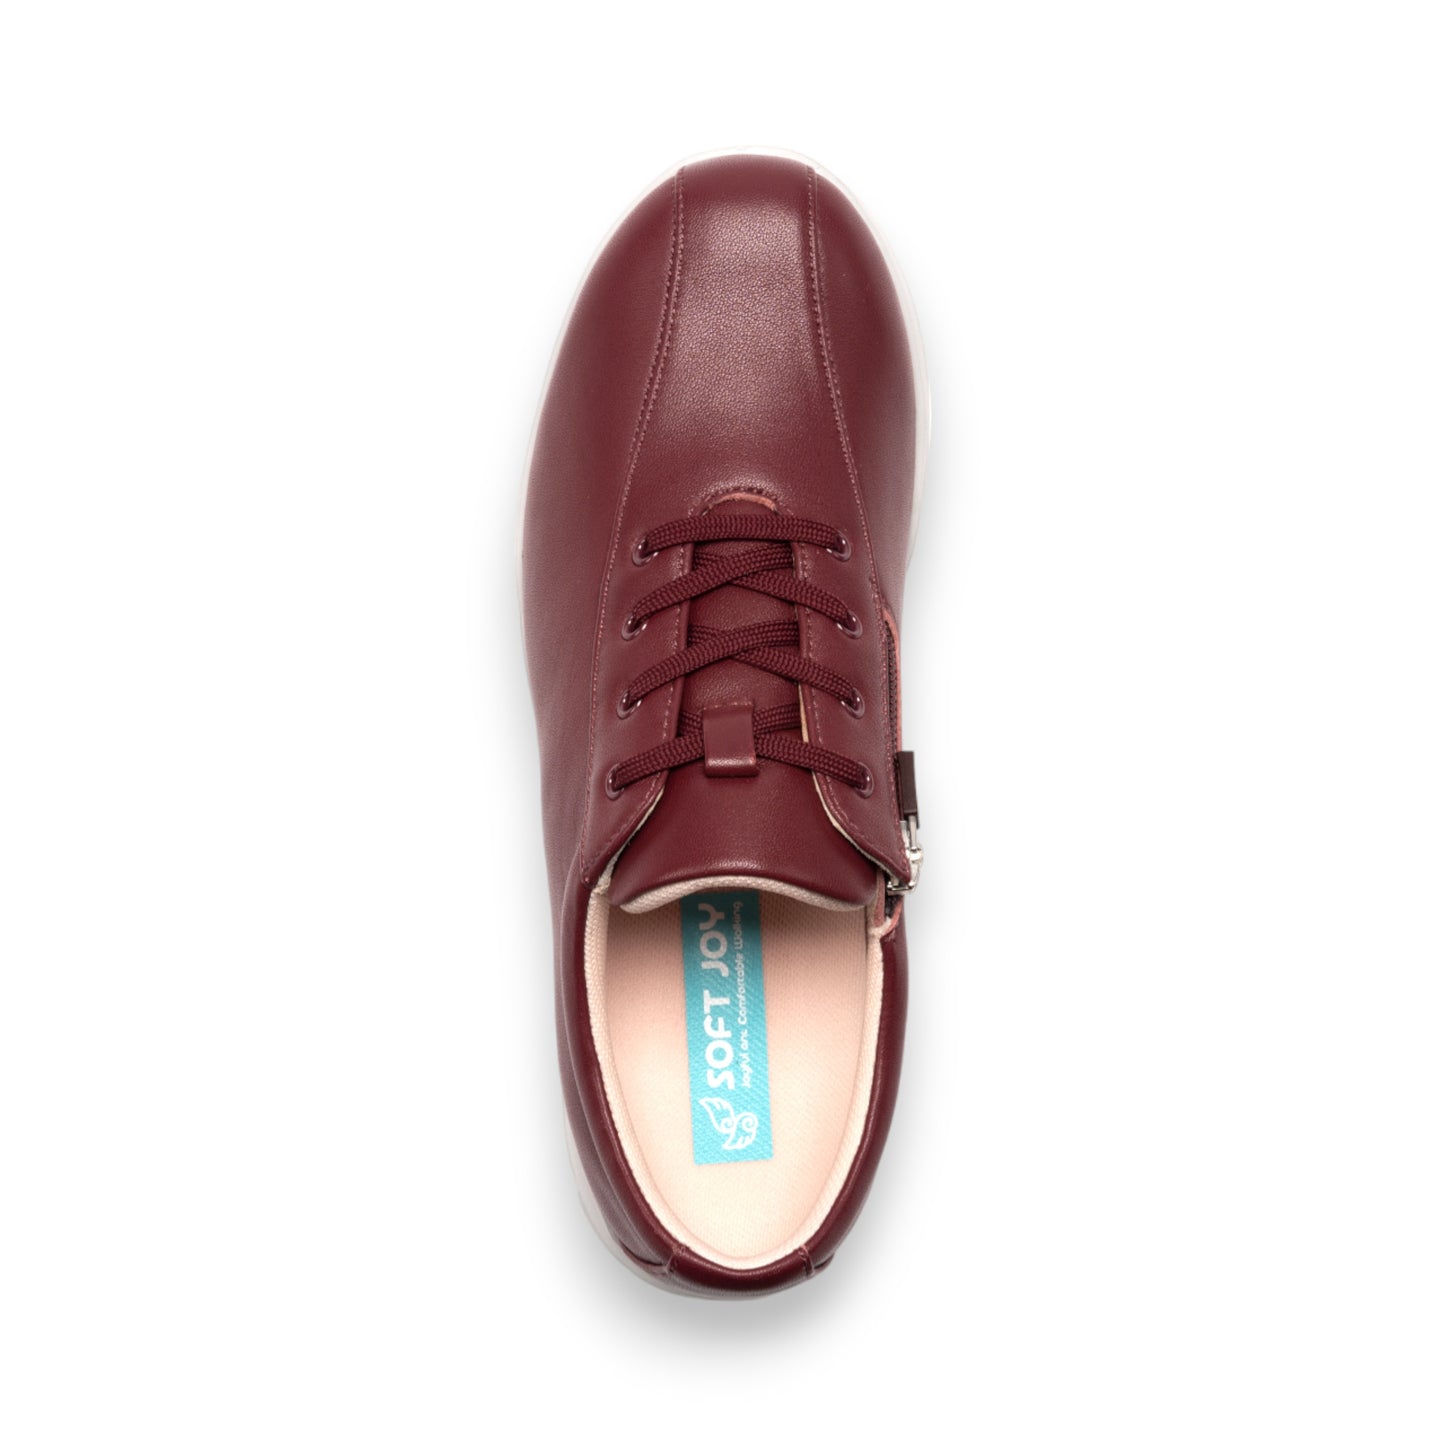 SOFTJOY | Soft cow leather sneakers with zipper #SJ001